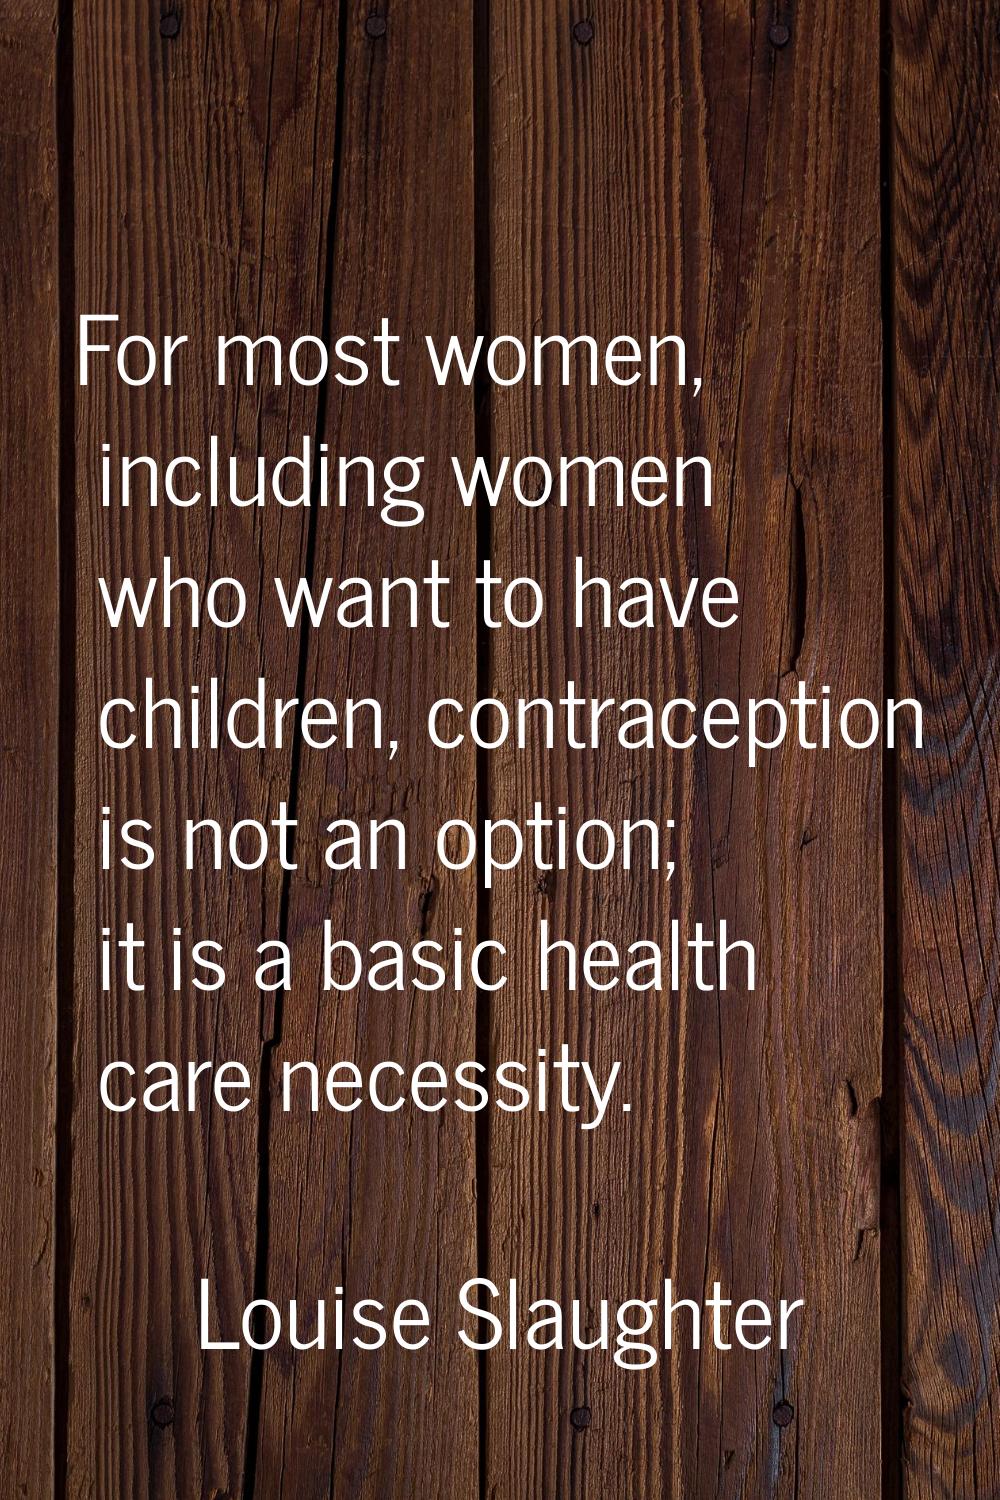 For most women, including women who want to have children, contraception is not an option; it is a 